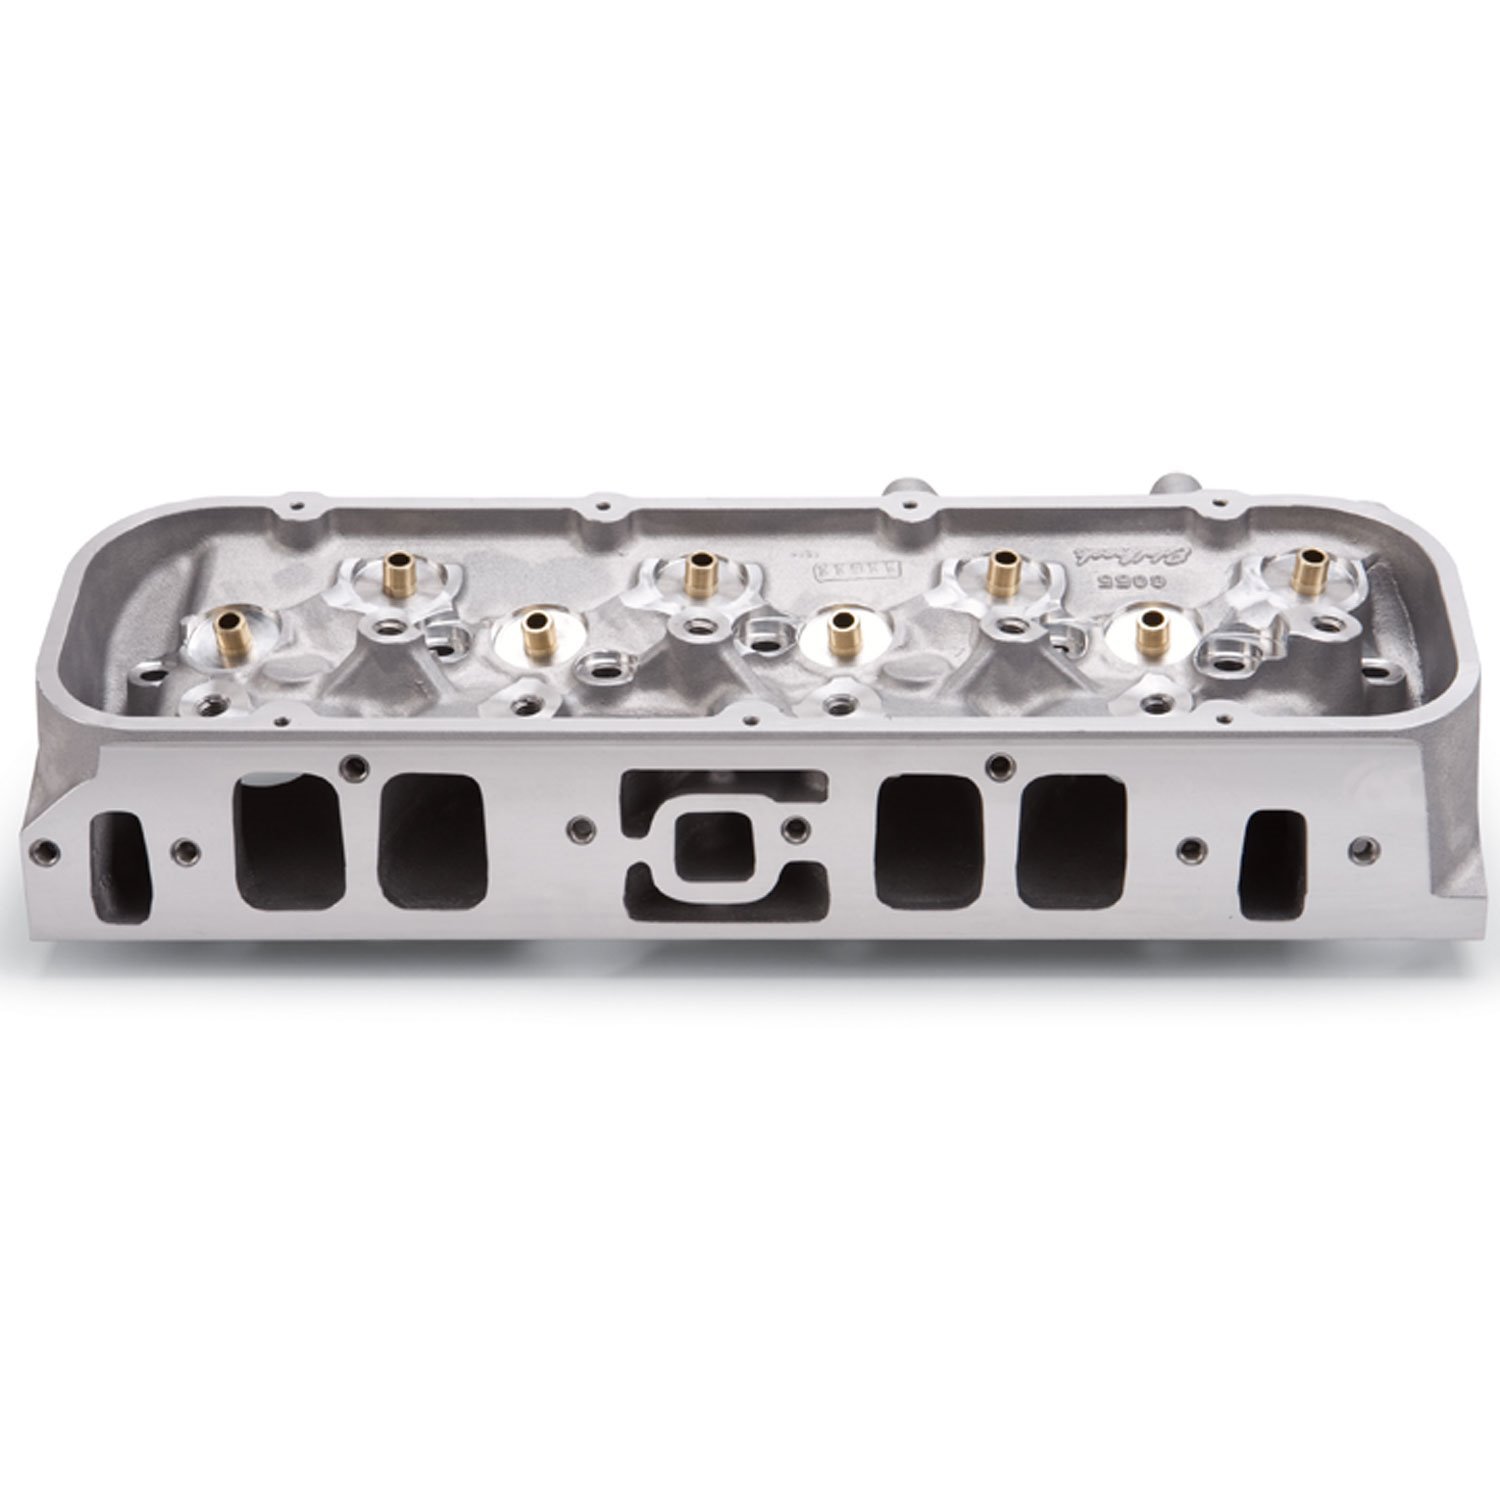 Performer RPM454-R Rectangle Port Aluminum Cylinder Head for